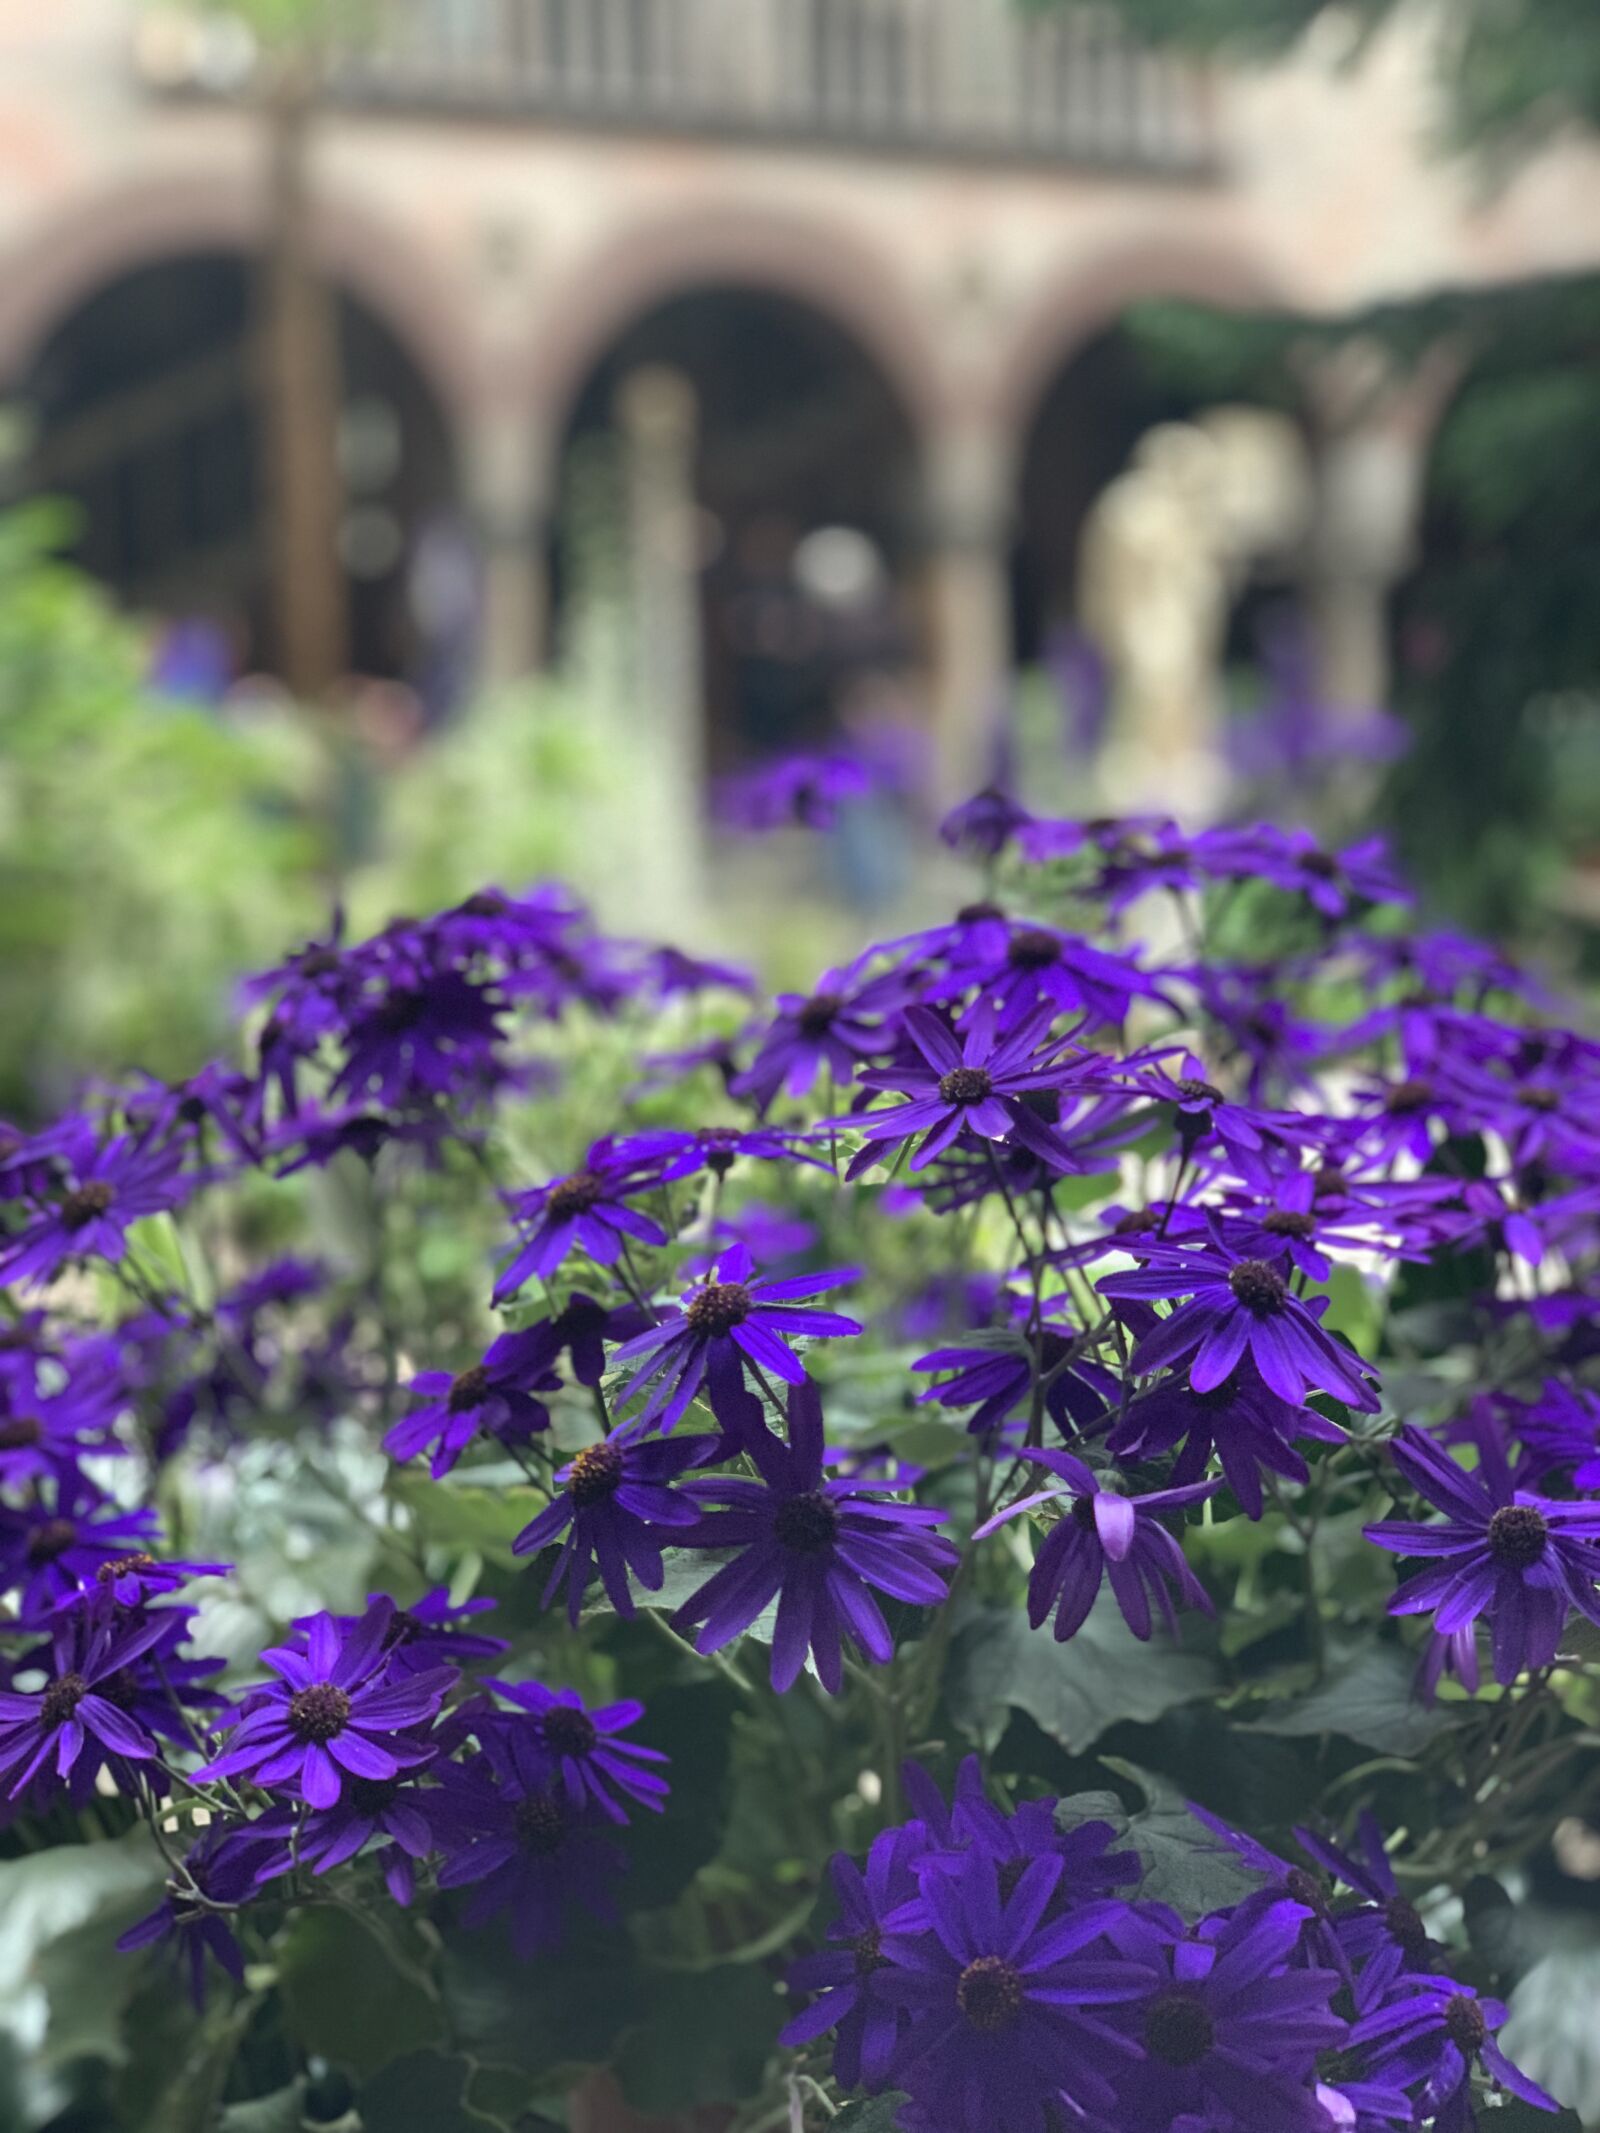 Apple iPhone XS Max sample photo. Flowers, museum, nature photography